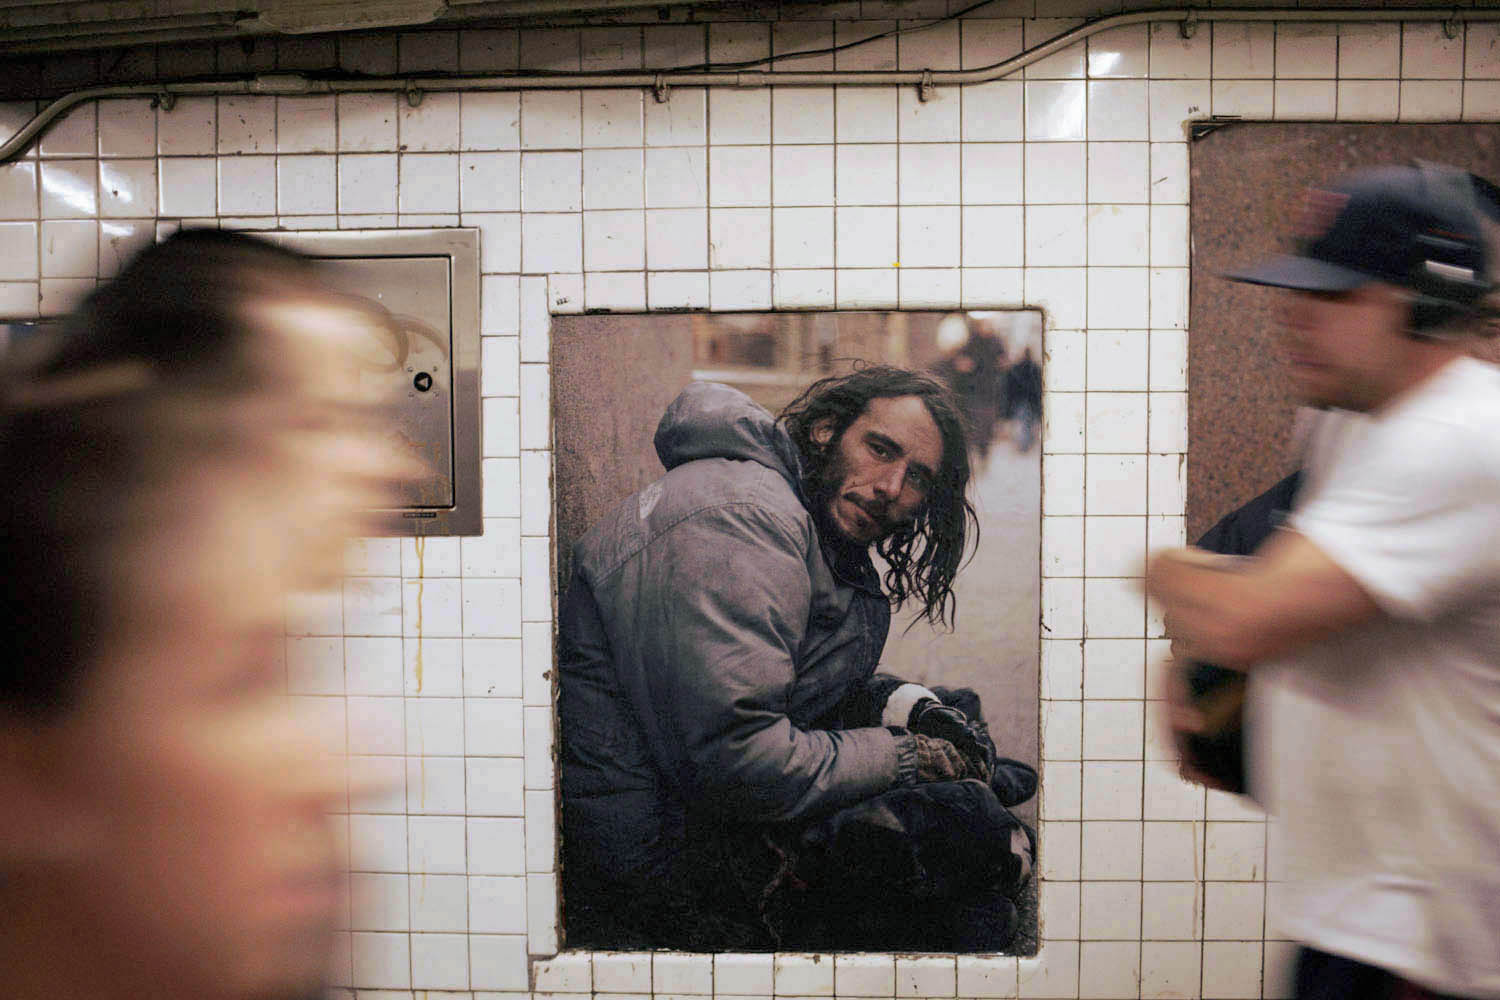 Artist Andres Serrano's photographic installation, Residents of New York, at the West 4th Street subway  station in New York City.